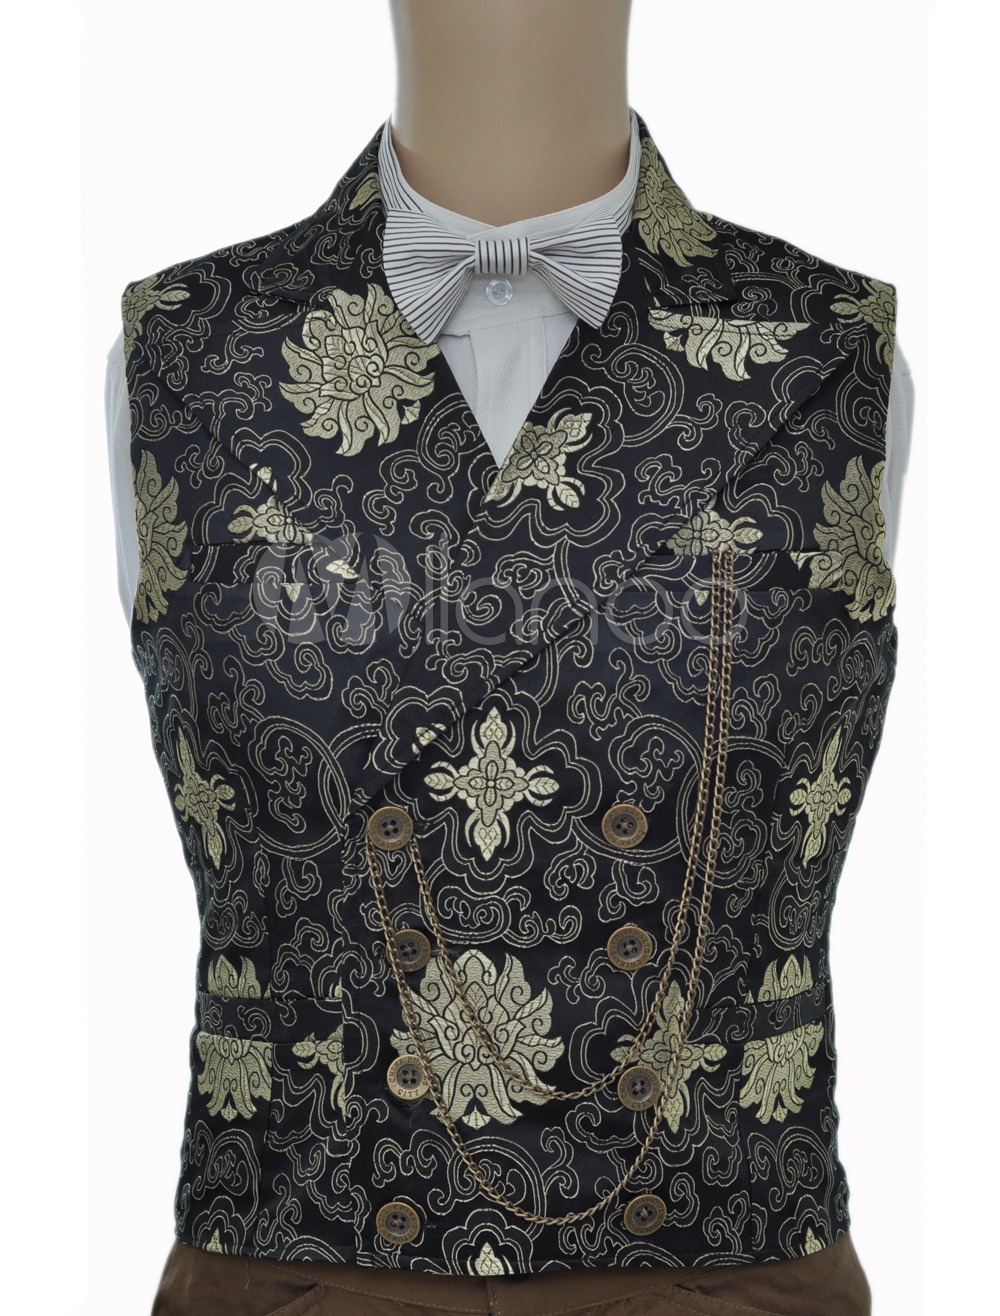 Black Jacquard Floral Steampunk Waistcoat For Halloween - Buy Online